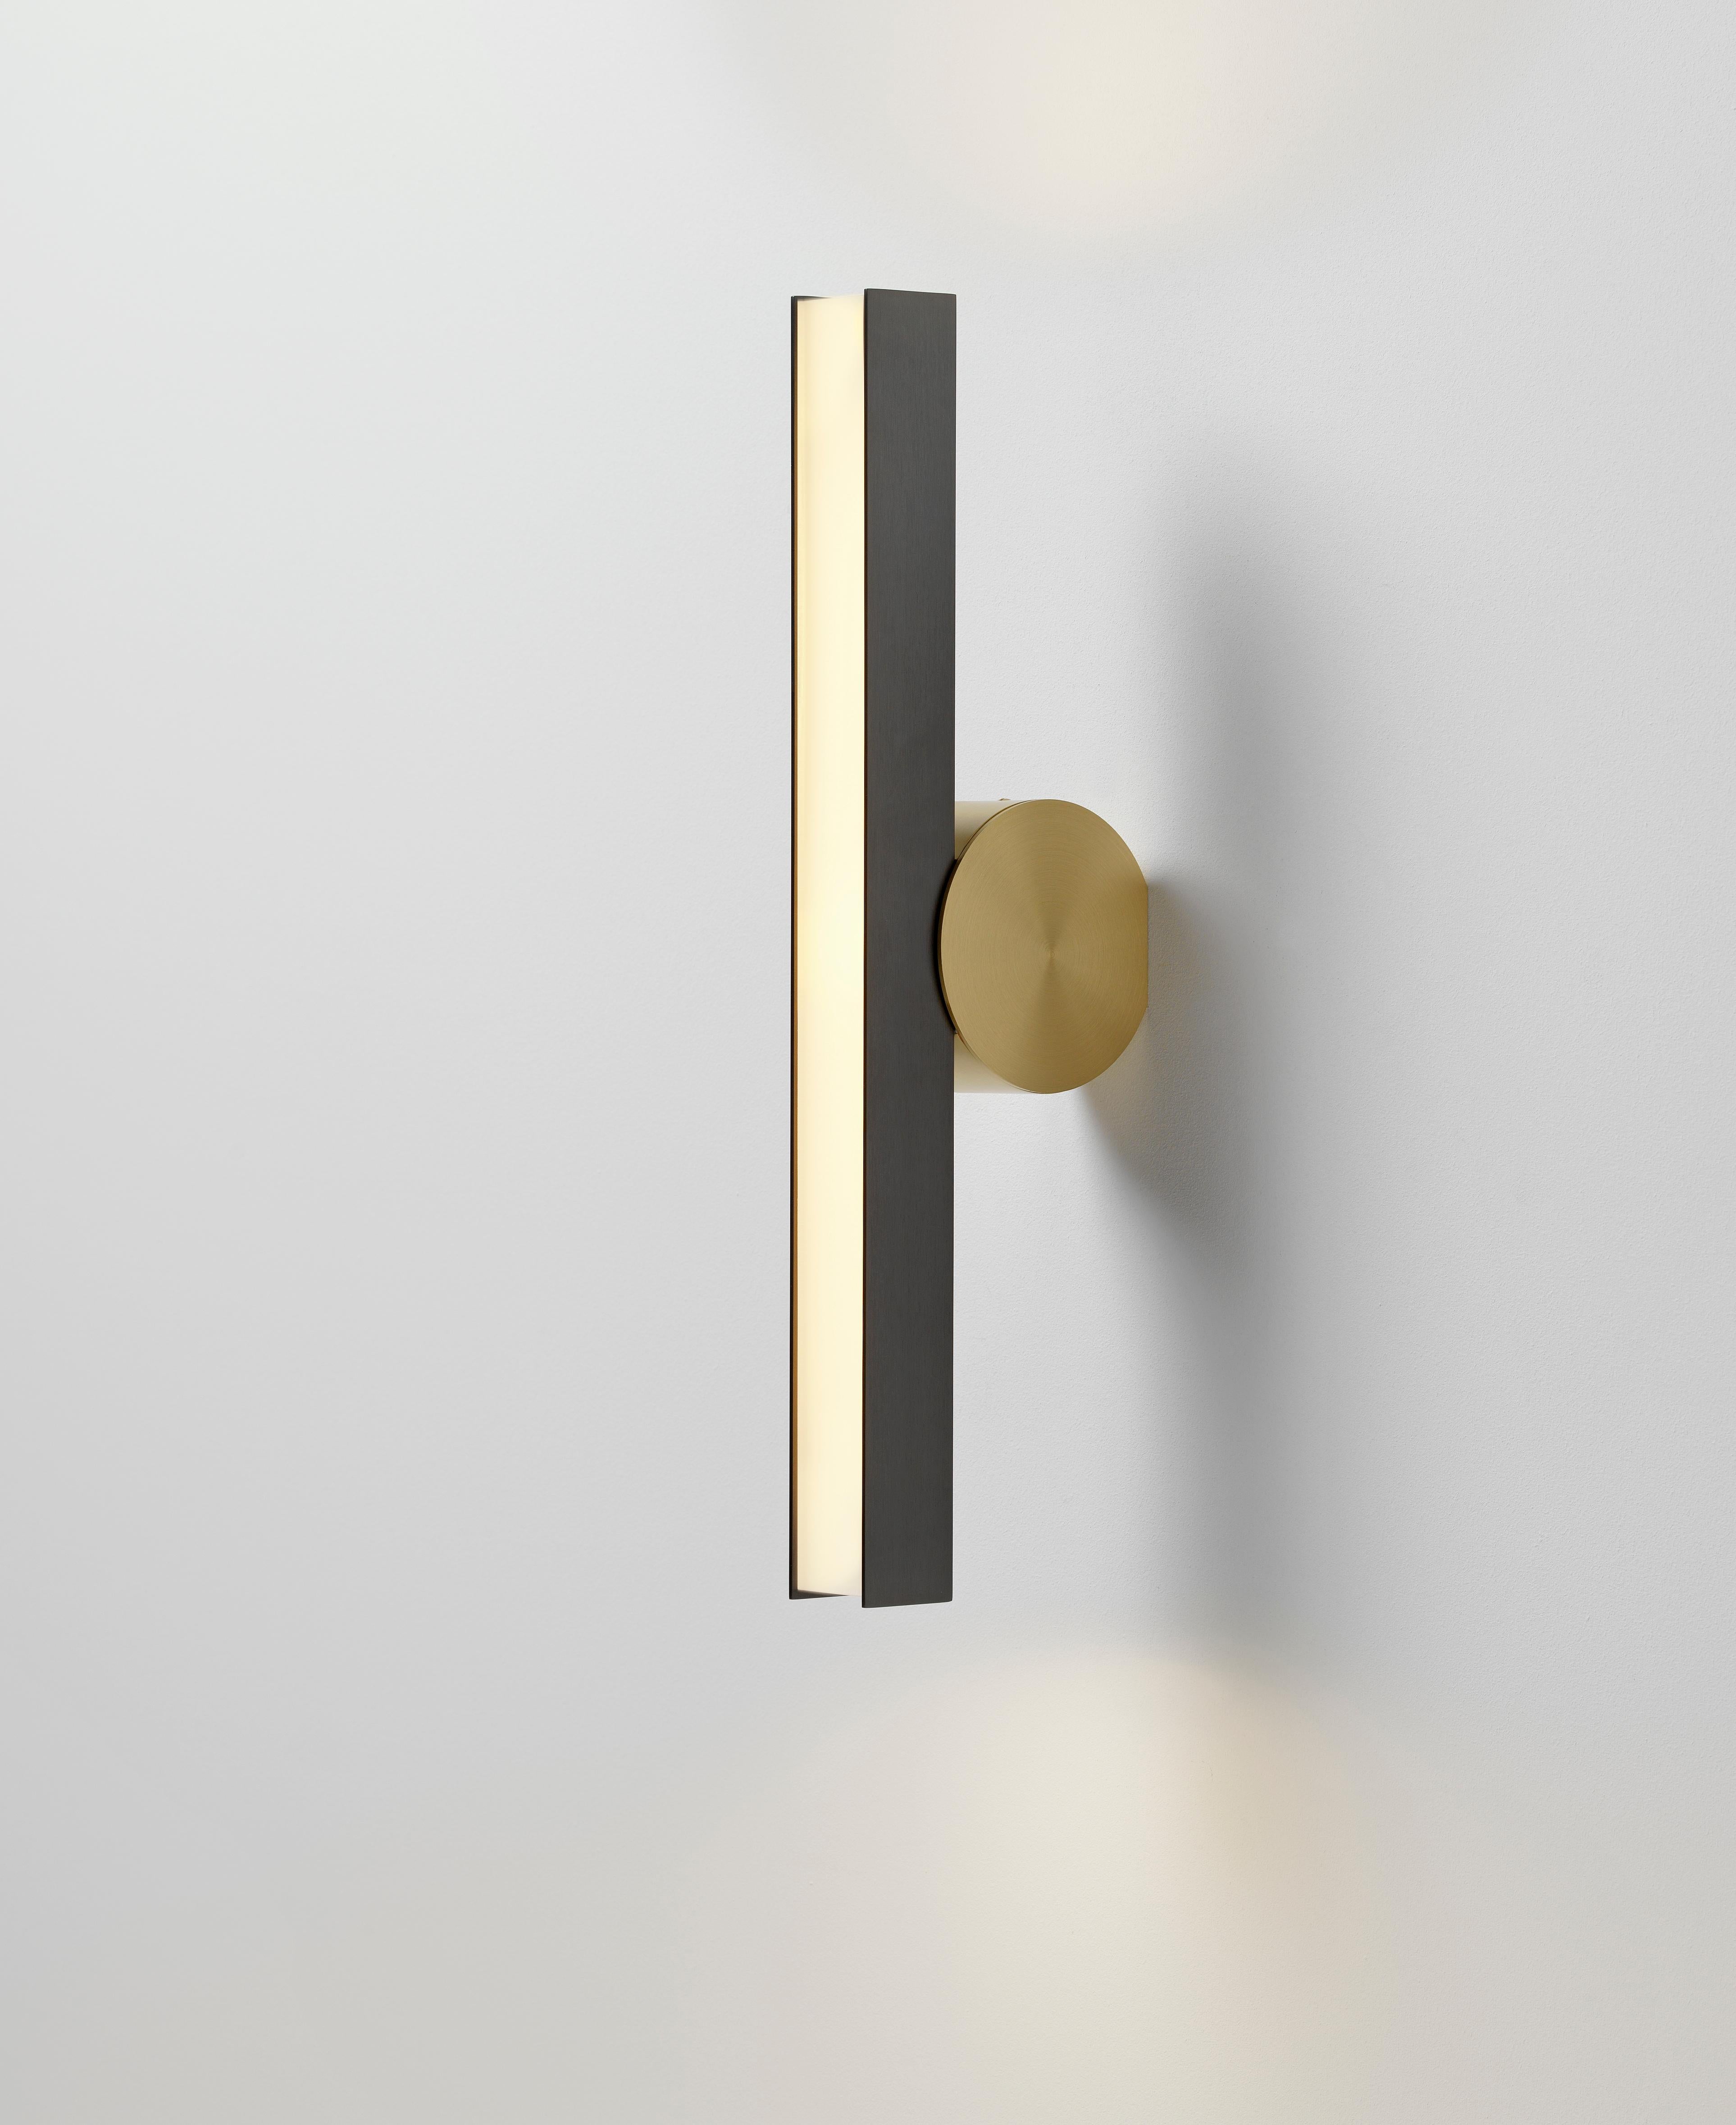 IP Calee V2 satin graphite and brass wall light by POOL
Dimensions: D13 x W4.4 X H45 cm
Materials: slid brass, satin graphite, satin brass
Others finishes and dimensions available.

All our lamps can be wired according to each country. If sold